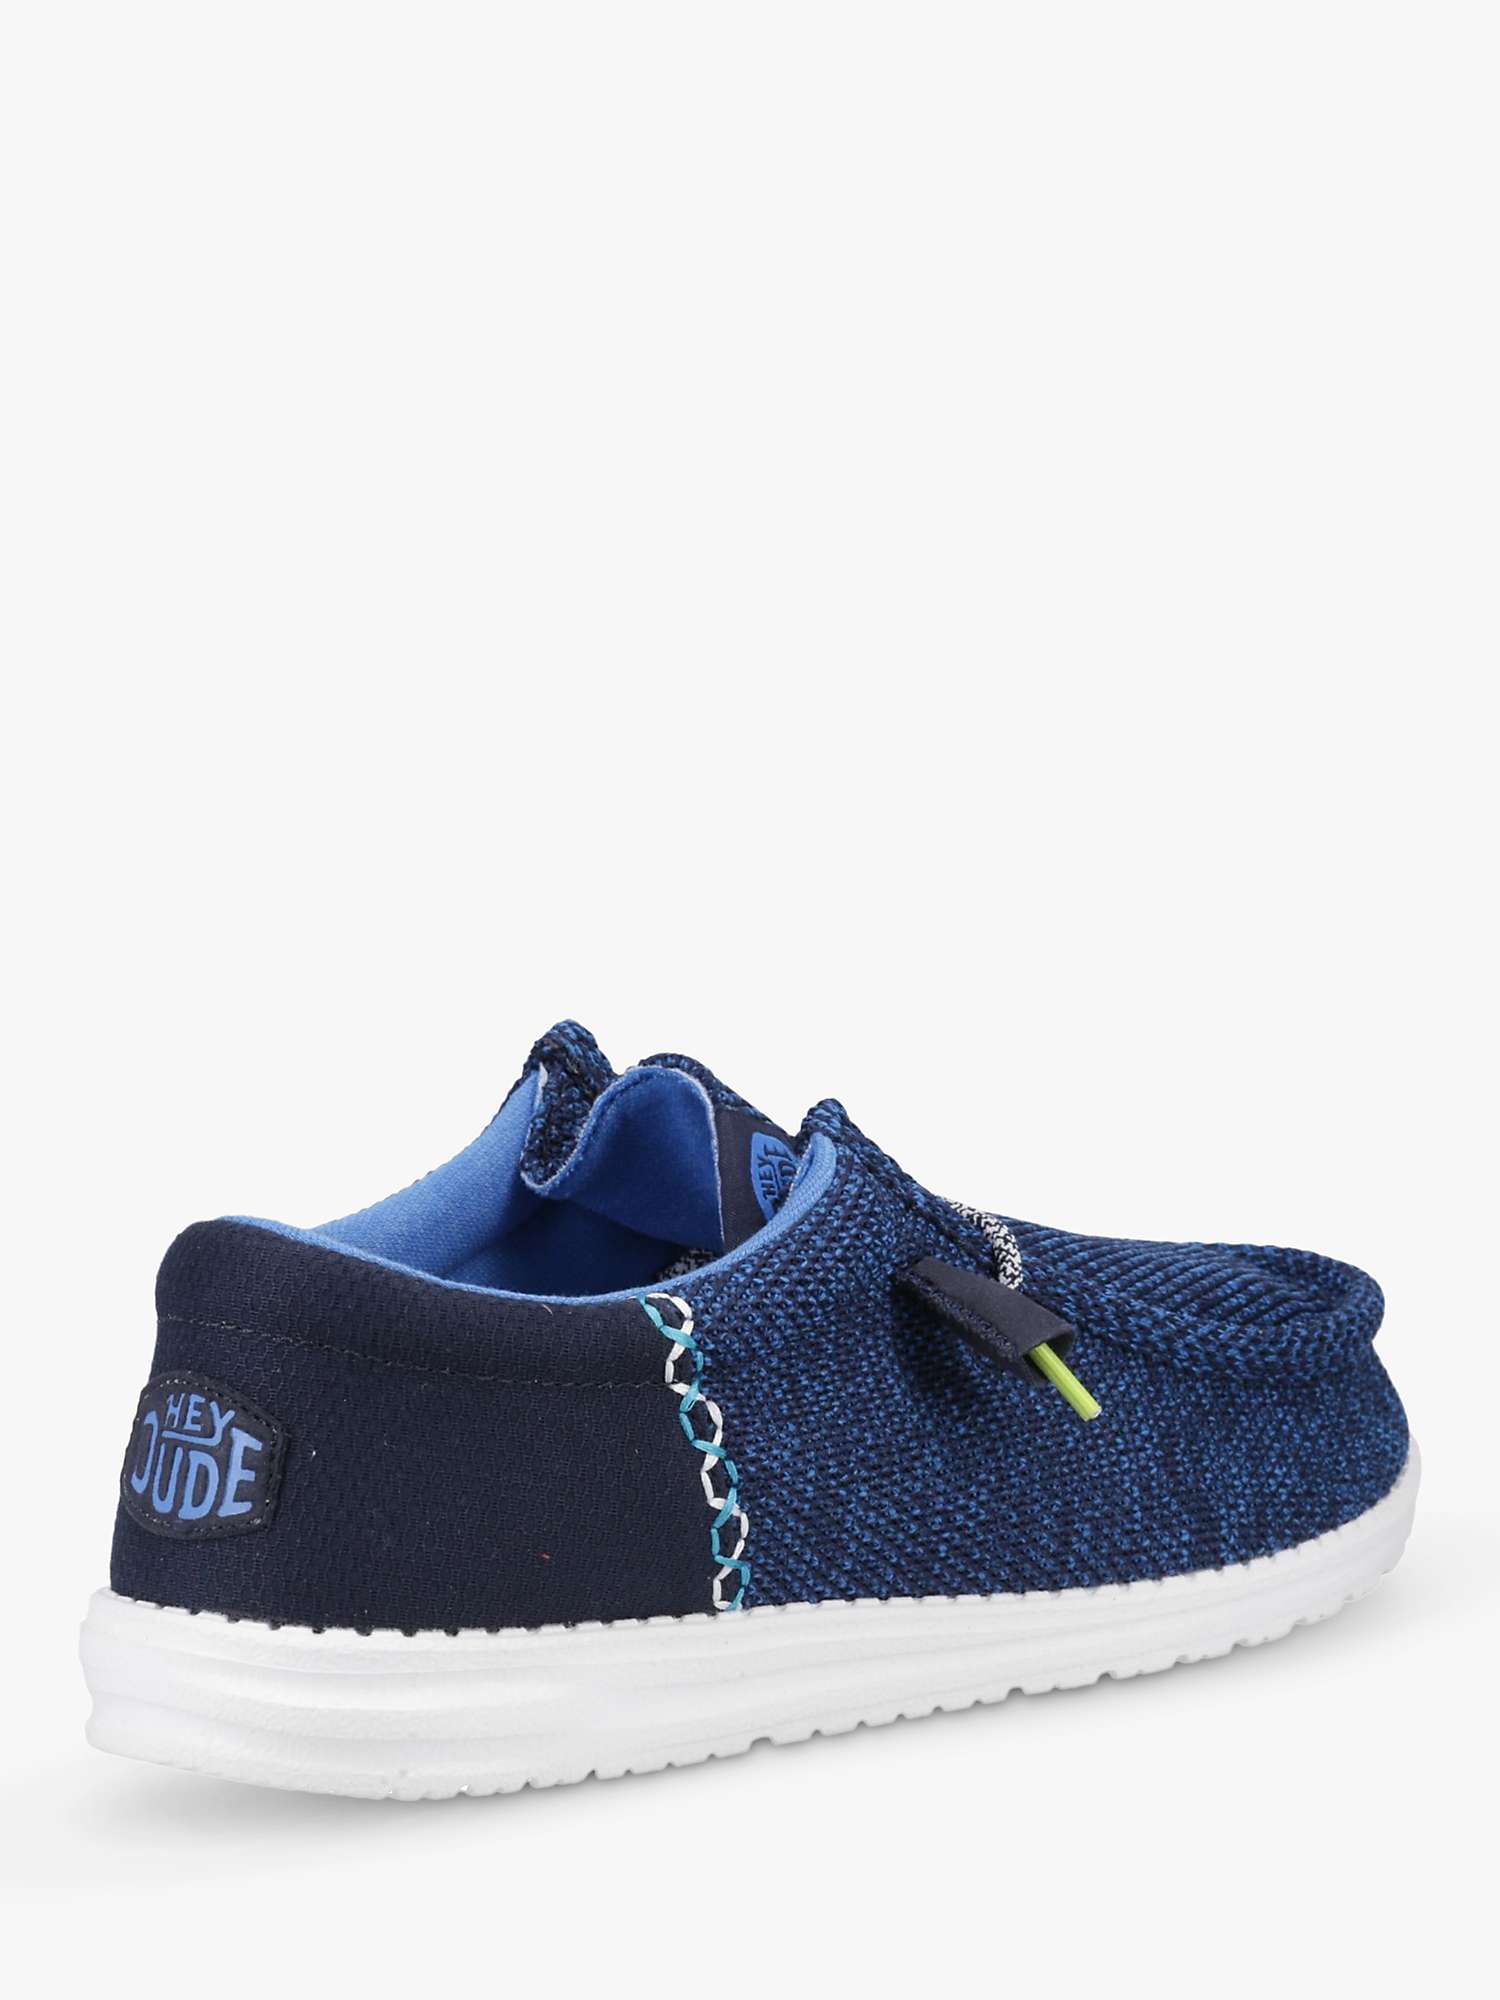 Buy Hey Dude Wally Funk Open Mesh Shoes, Blue Online at johnlewis.com